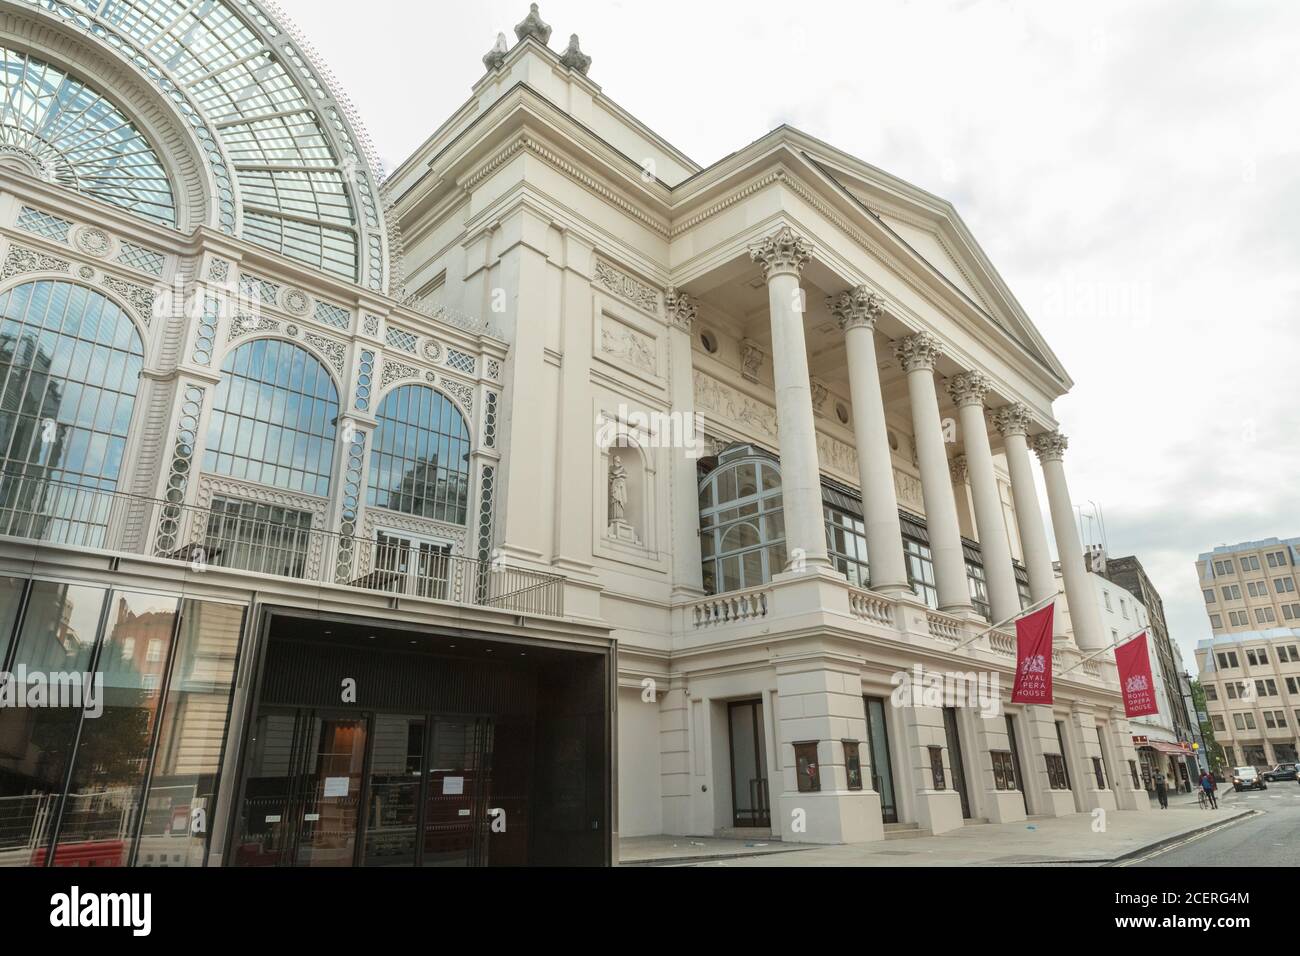 The Royal Opera House, exterior view of Opera and ballet venue in Covent Garden, London, England, UK Stock Photo